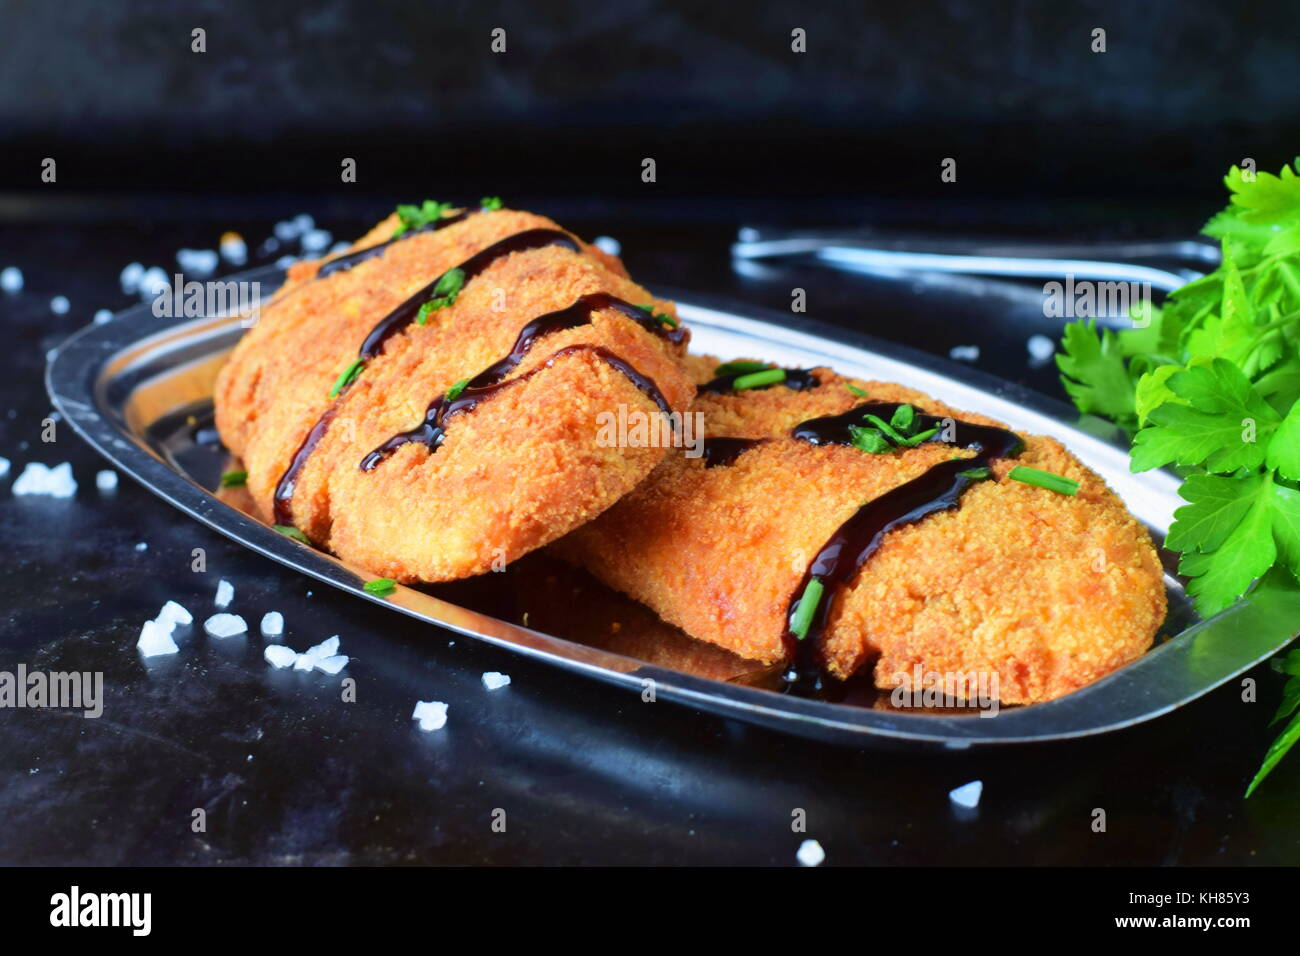 Carrot fritters on a metal plate on a black abstract background. Healthy eating concept Stock Photo